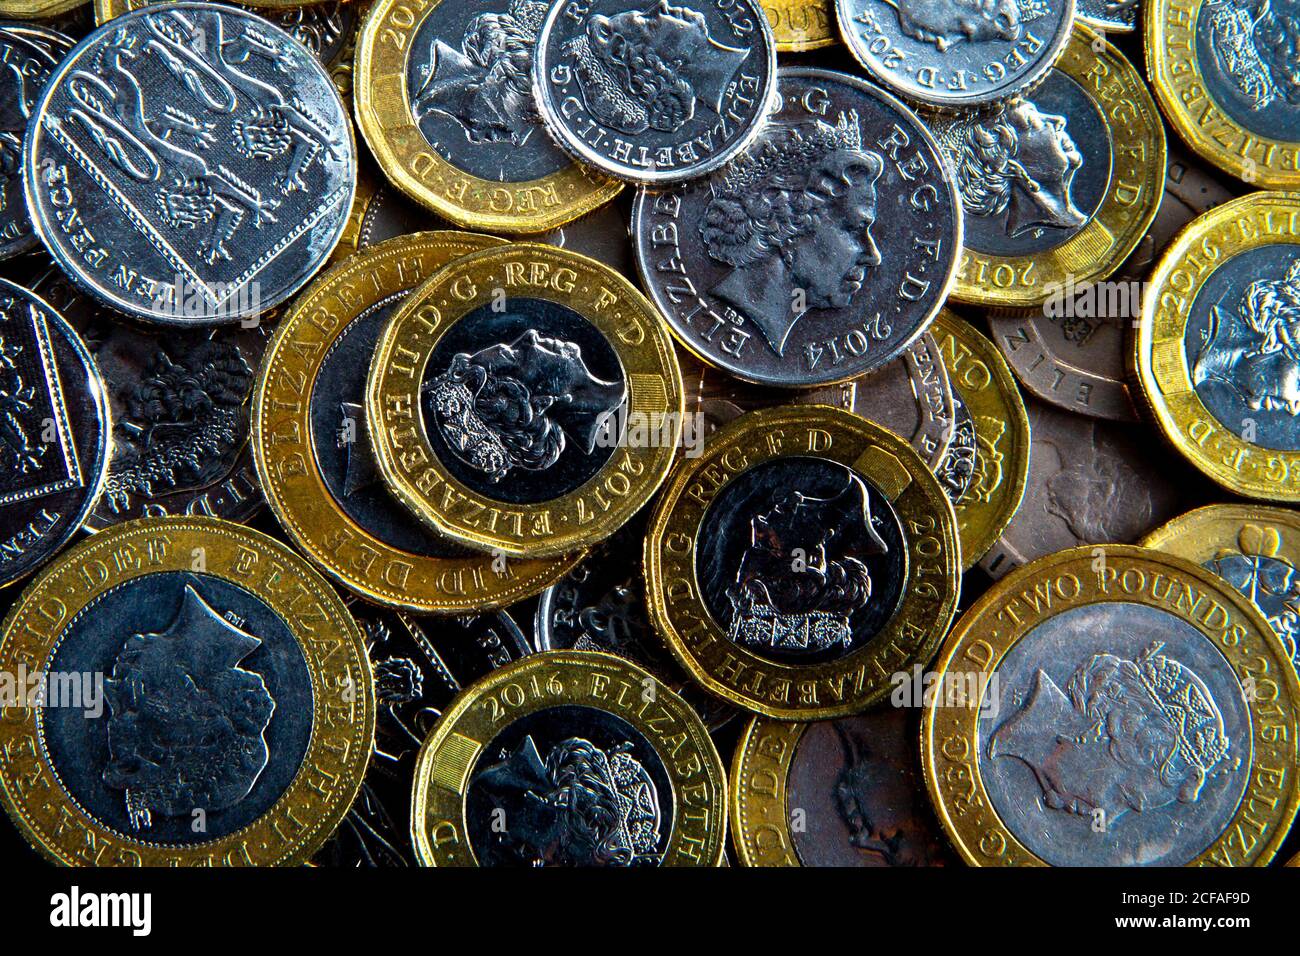 Studio shot of scattered British Pound coins Stock Photo